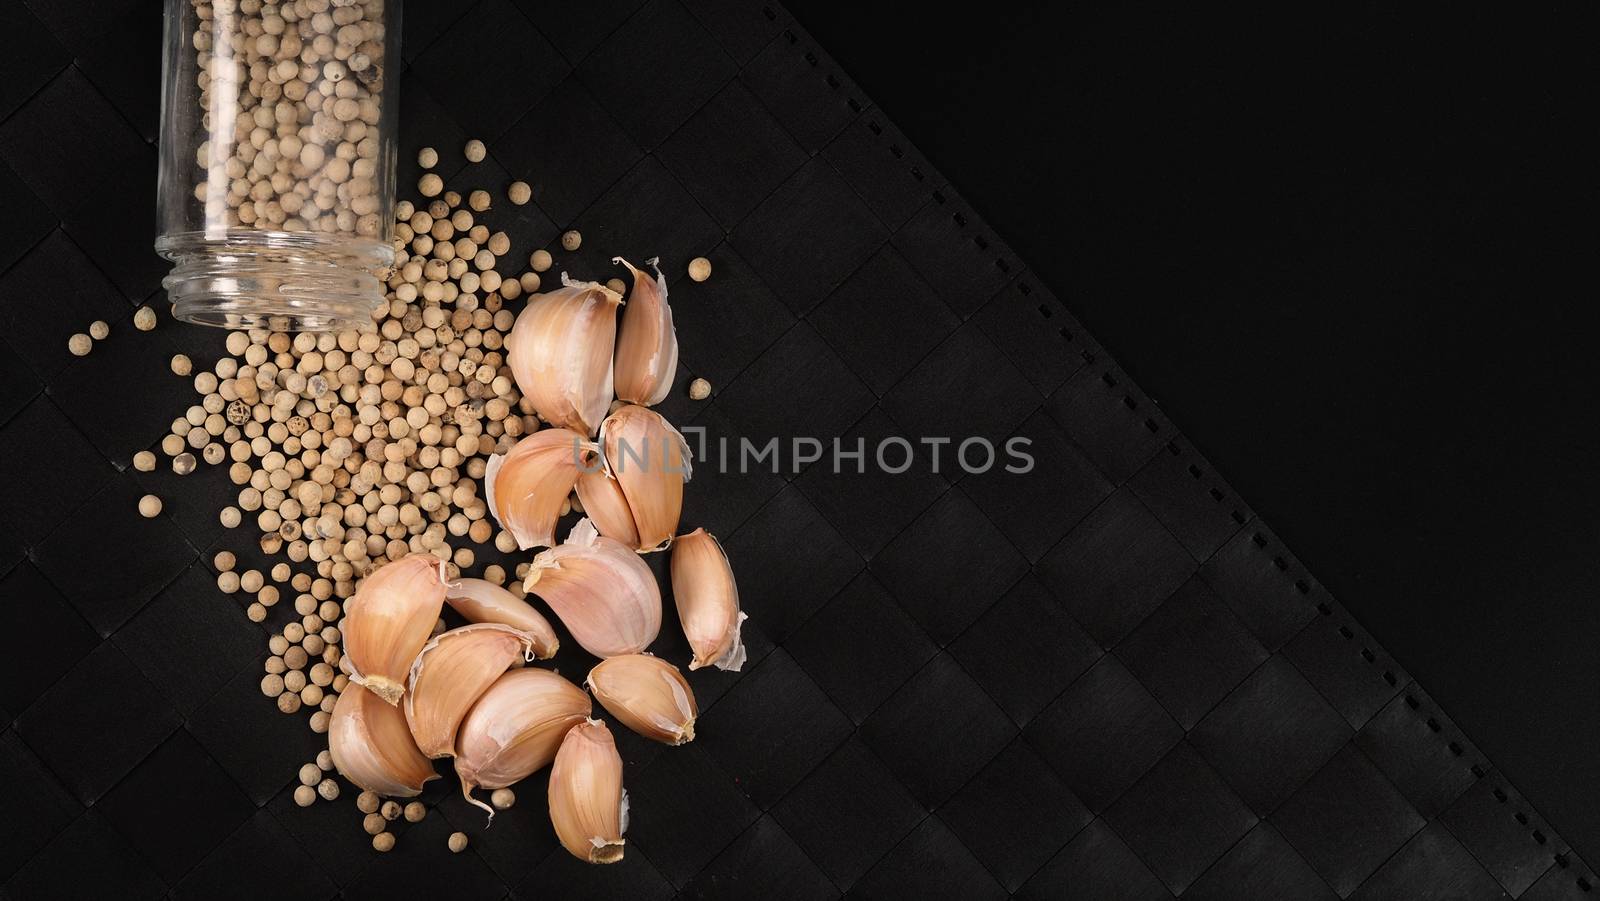 Natural Garlic and white peppercorn in glass bottle on plate mat black background in studio shot. It is main ingrediant for many asian recipe menu such as Singapore Bak kut teh, Thailand’s Pad Thai and more.